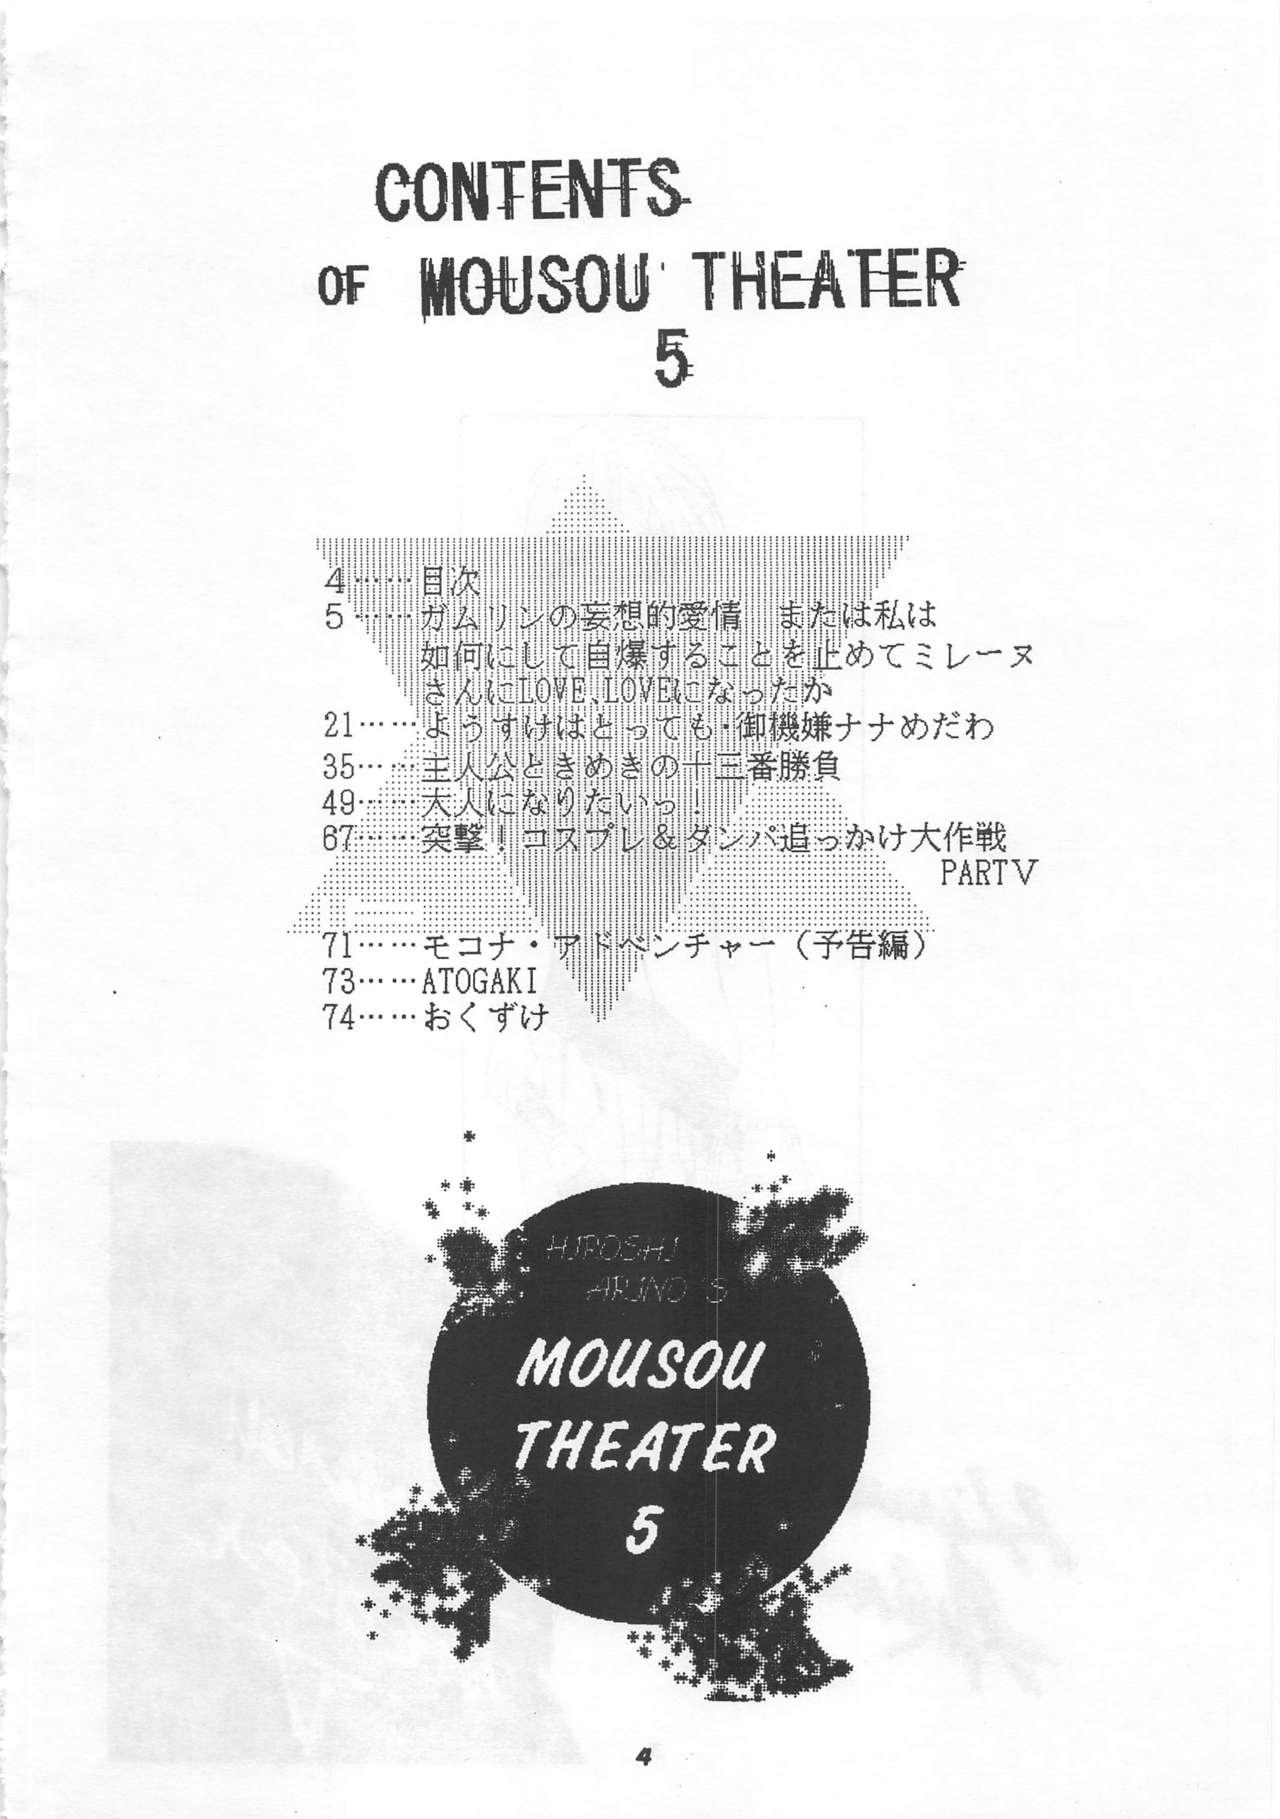 MOUSOU THEATER 5 3